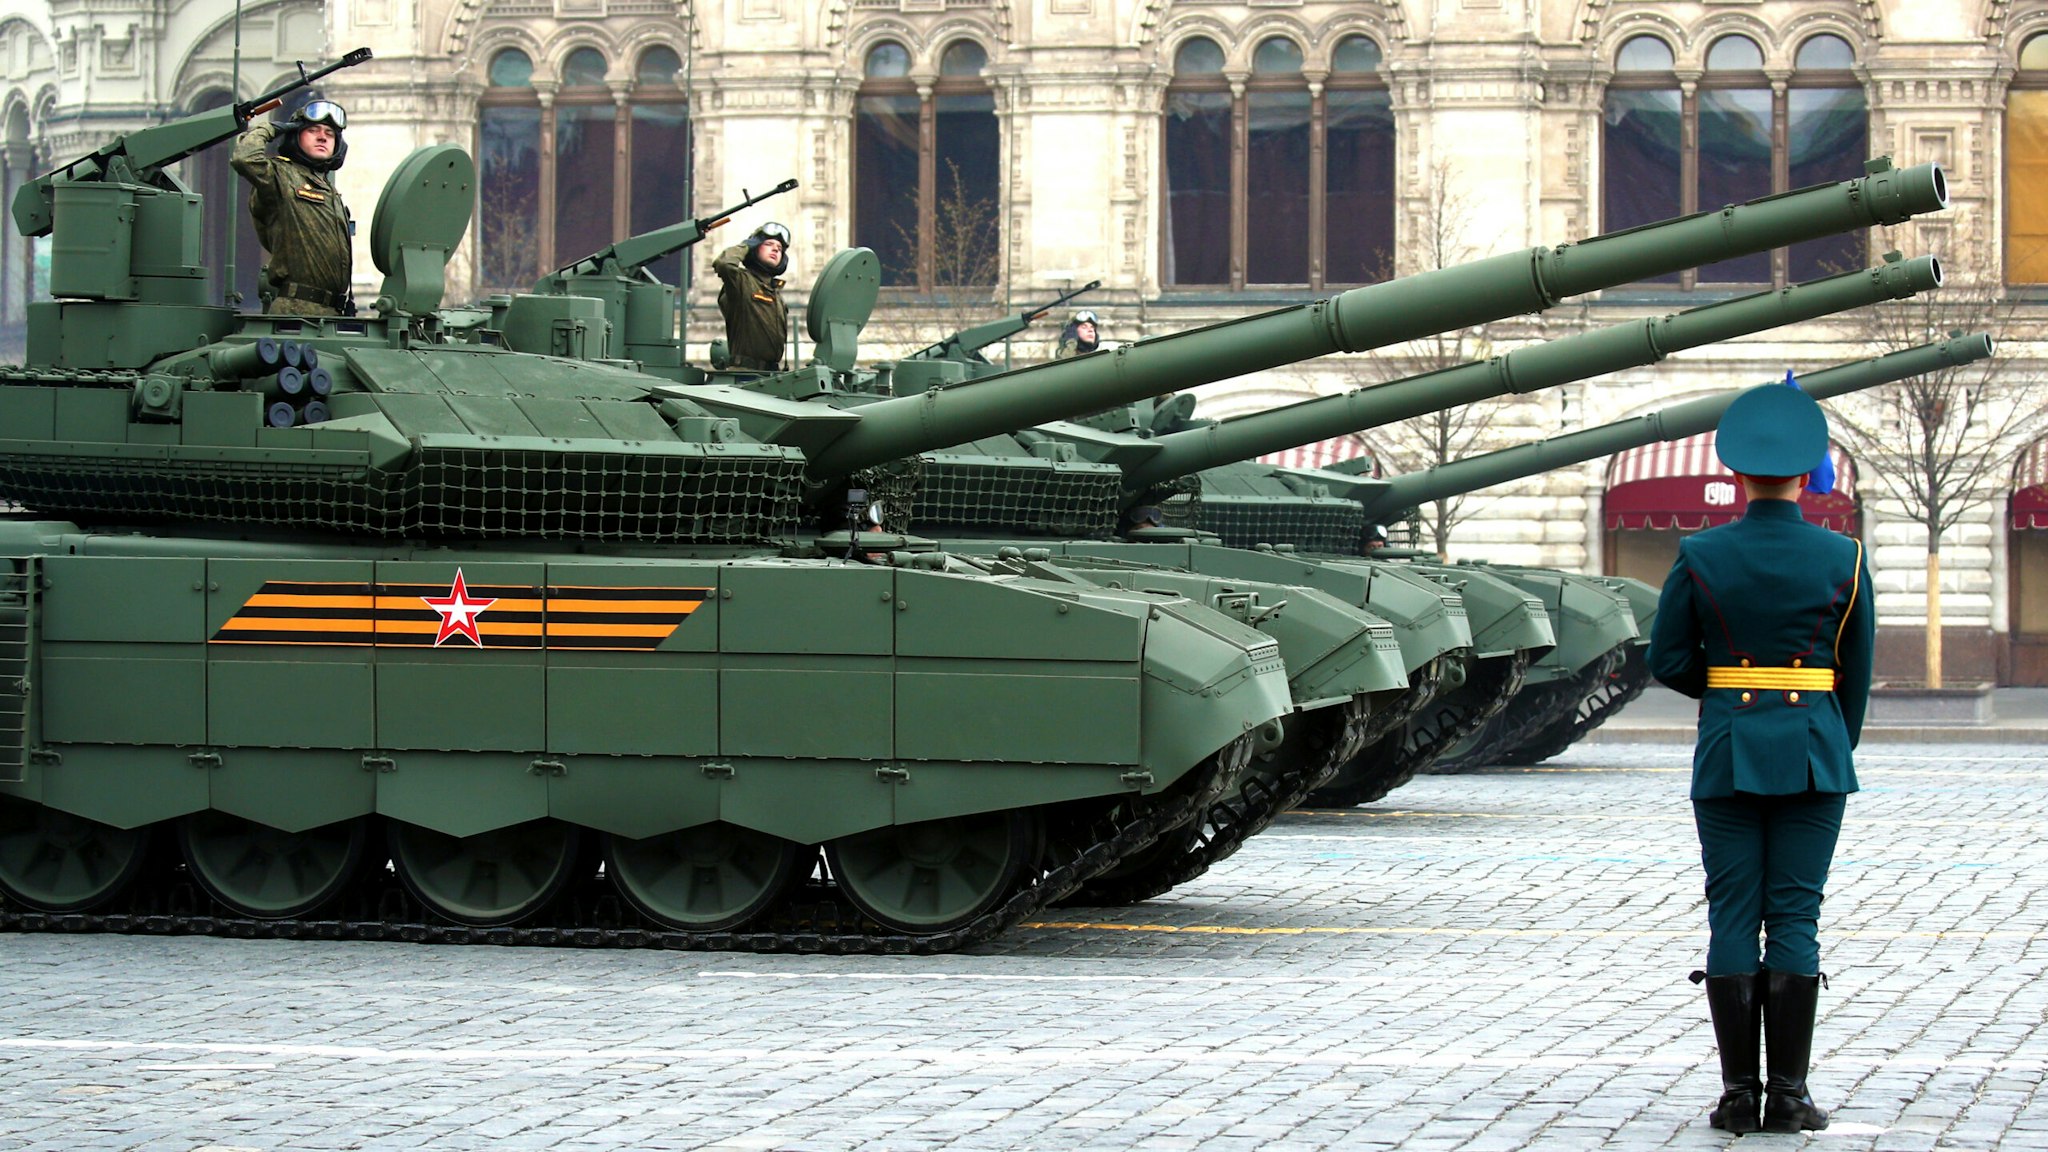 MOSCOW, RUSSIA MAY 7, 2021: T-14 Armata battle tanks roll down Moscow's Red Square during a dress rehearsal of a Victory Day military parade marking the 76th anniversary of the victory over Nazi Germany in World War II.